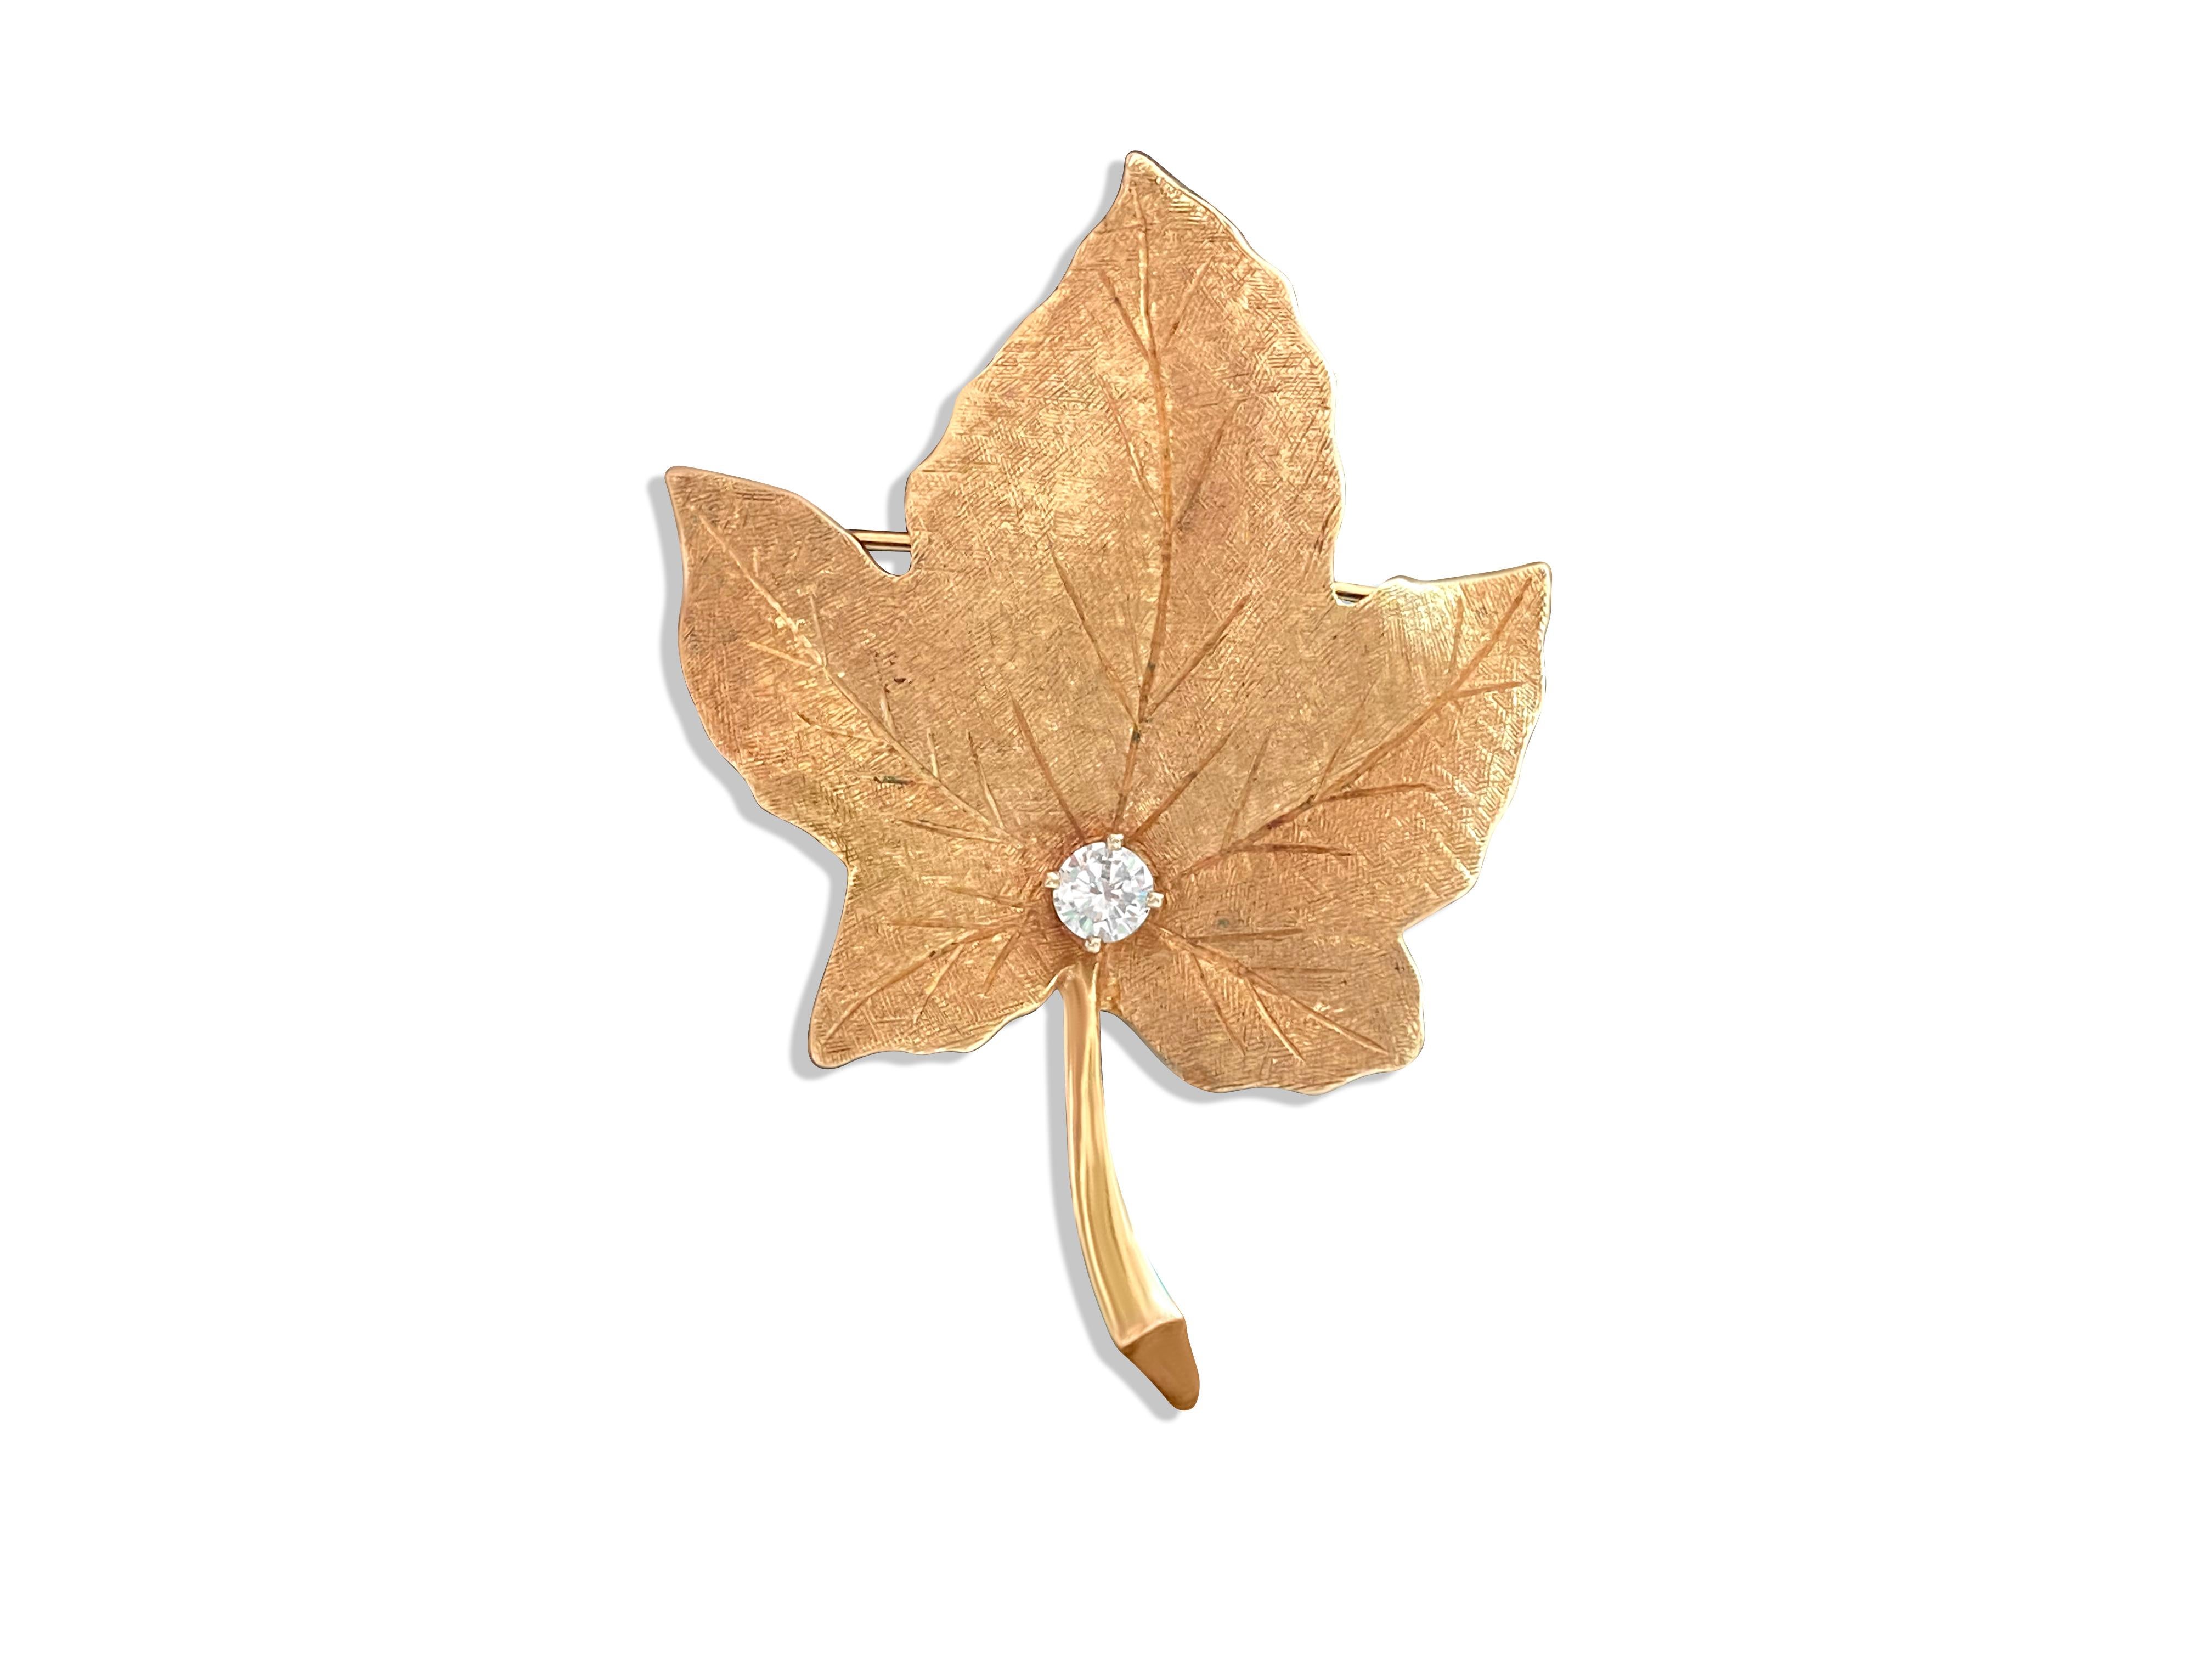 Fashioned from radiant 18k yellow gold, this captivating maple leaf brooch exudes timeless elegance. Adorning its intricate design is a dazzling 0.50 carat diamond, boasting VS clarity and F color, ensuring its natural brilliance. With its exquisite